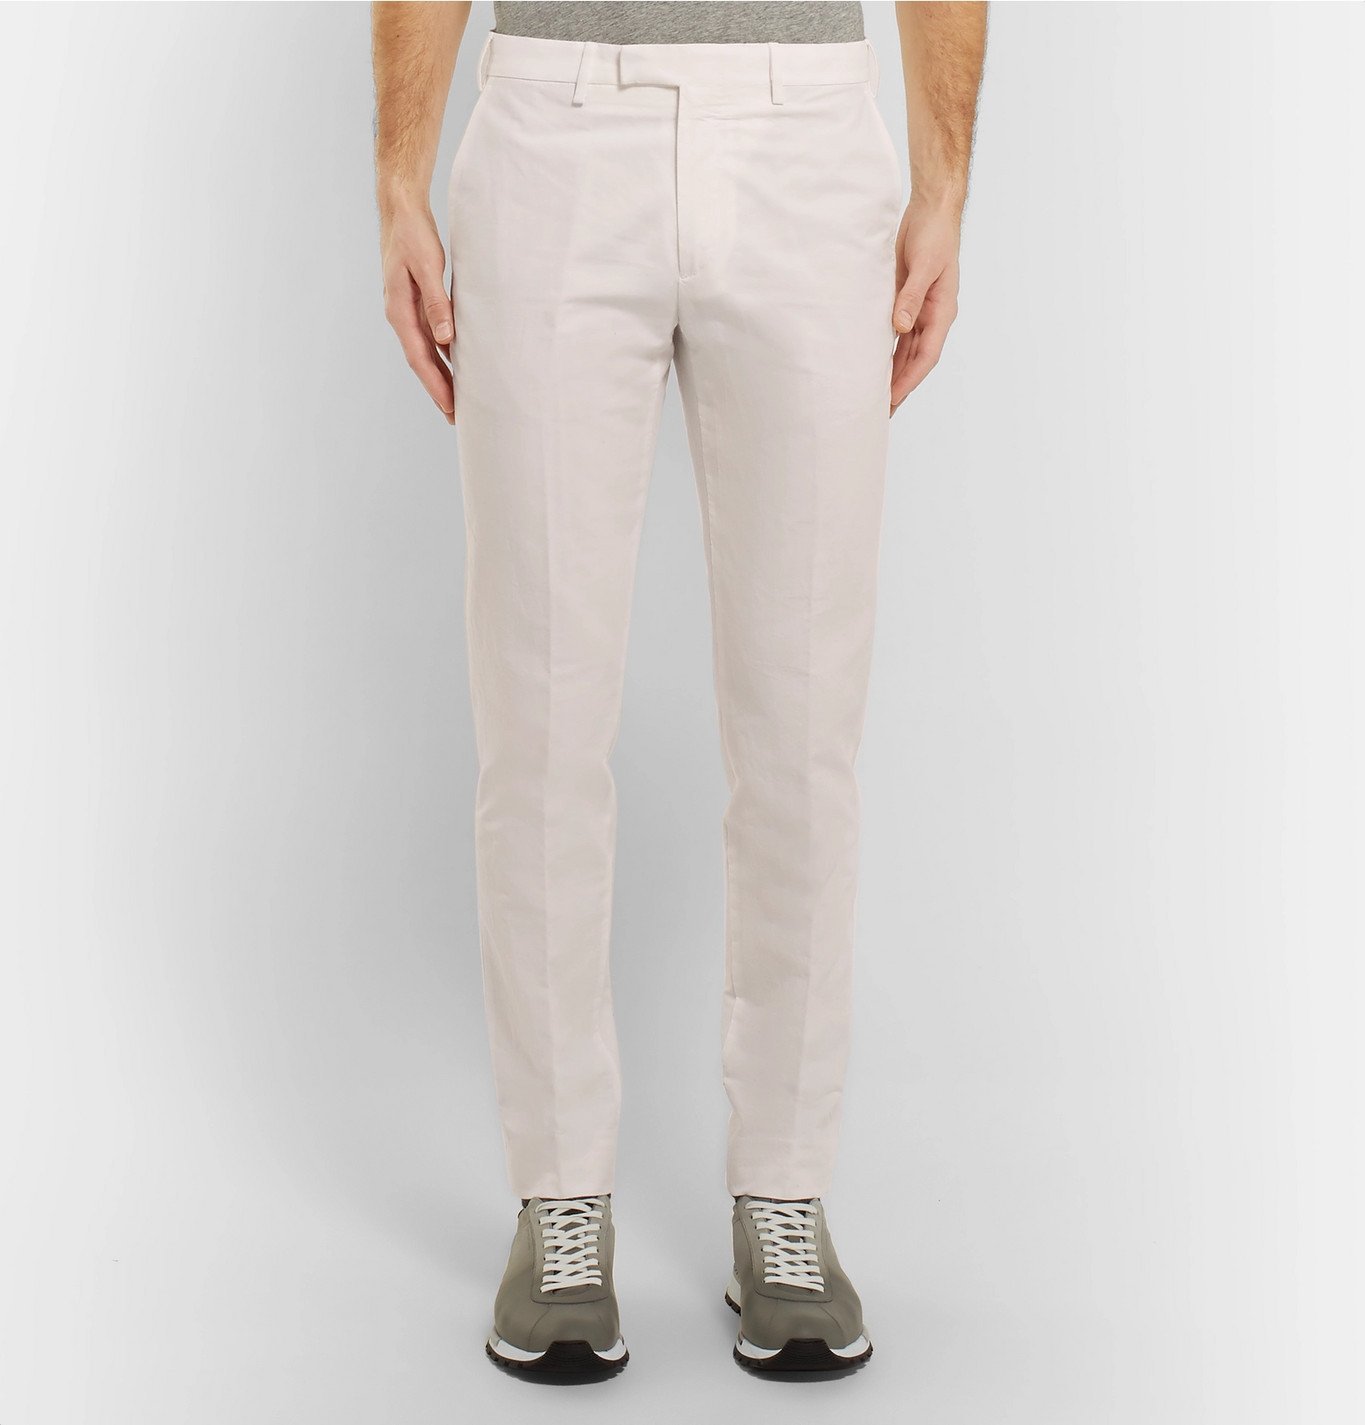 SALLE PRIVÉE - Gehry Slim-Fit Cotton and Linen-Blend Chinos - White ...